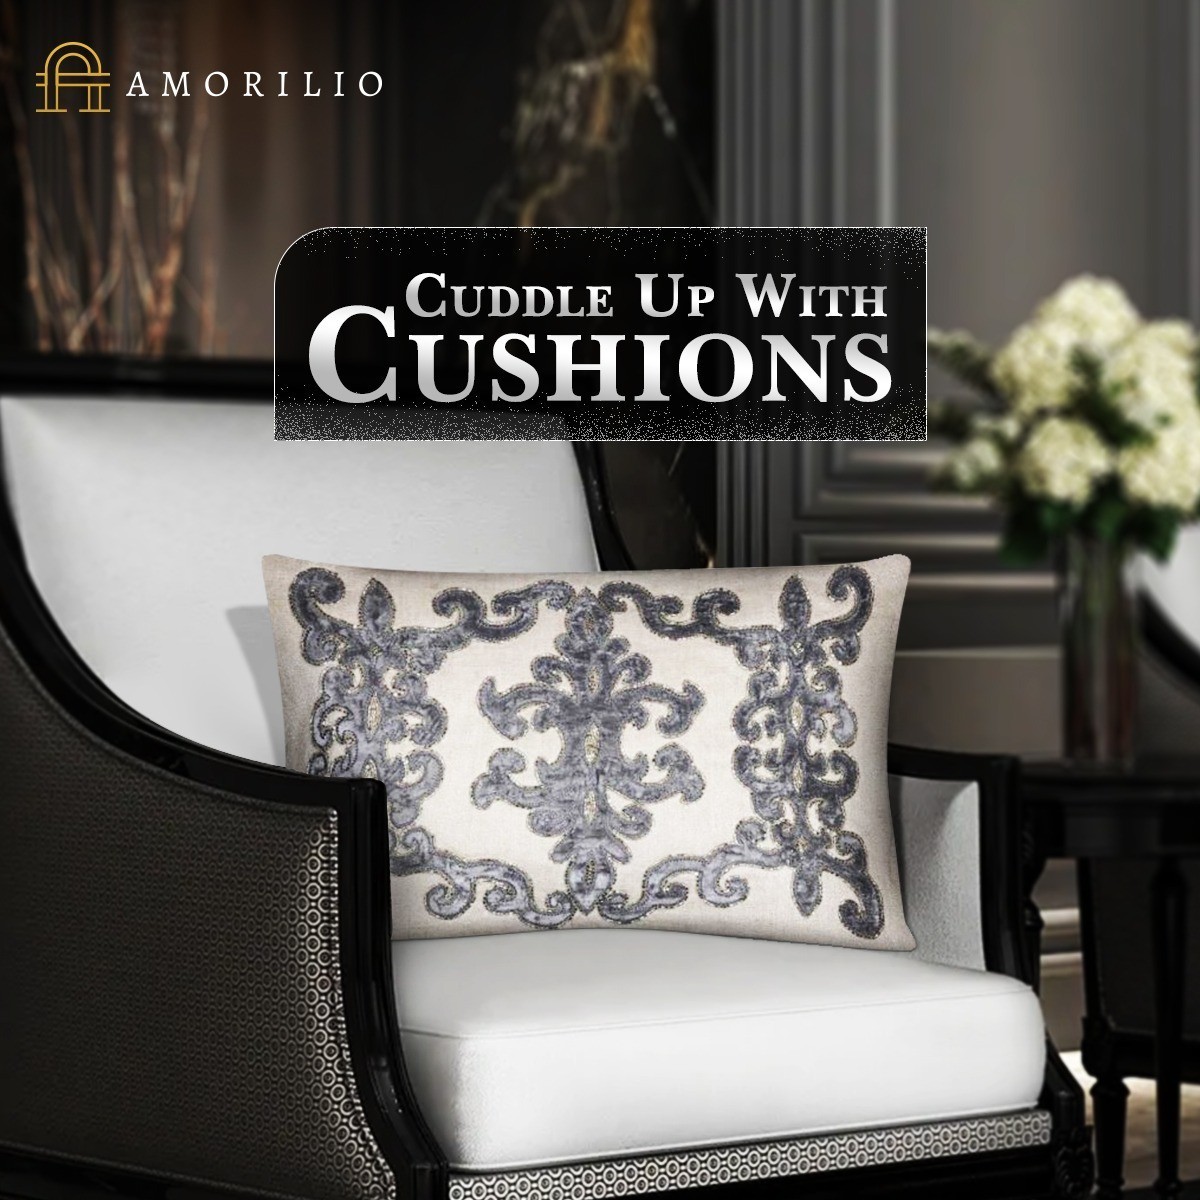 Buy Luxury Cushion Covers From Amorilio In This Christmas